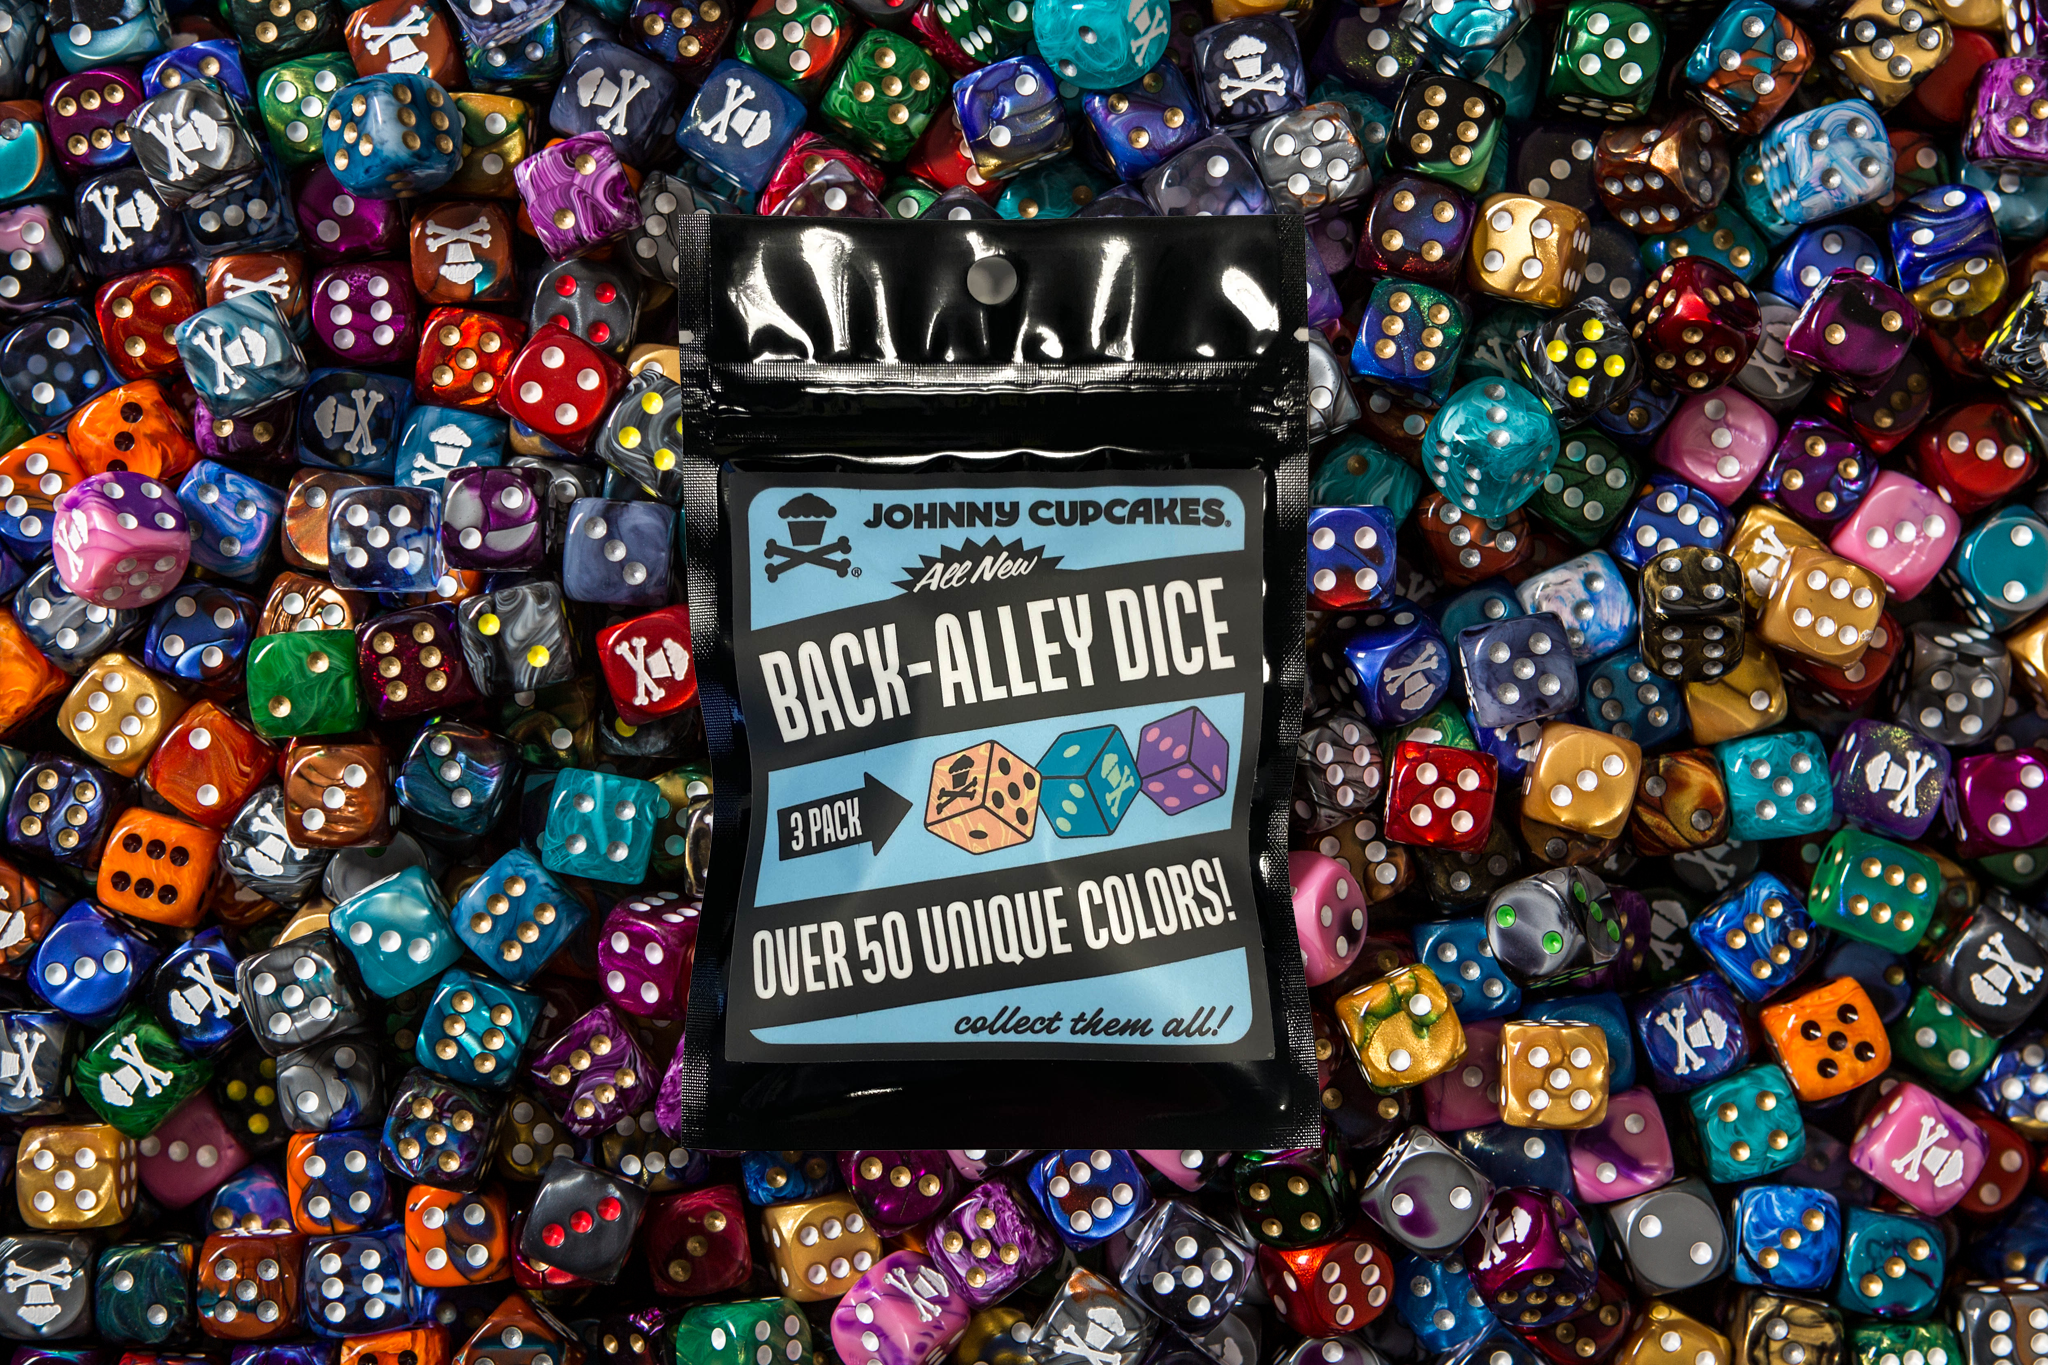 Back-Alley Dice